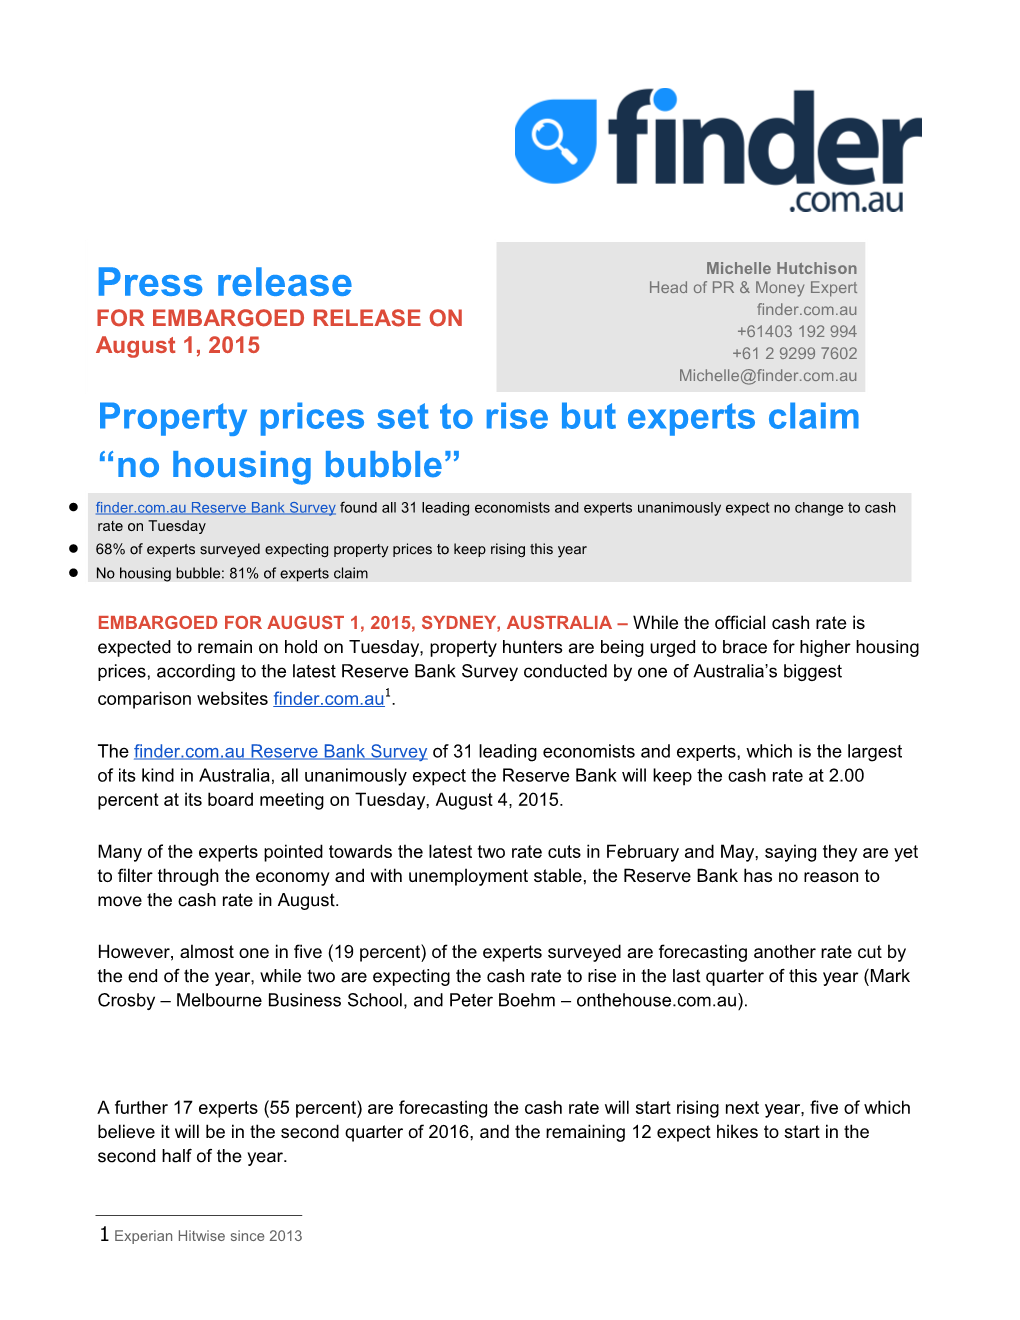 Property Prices Set to Rise but Experts Claim No Housing Bubble